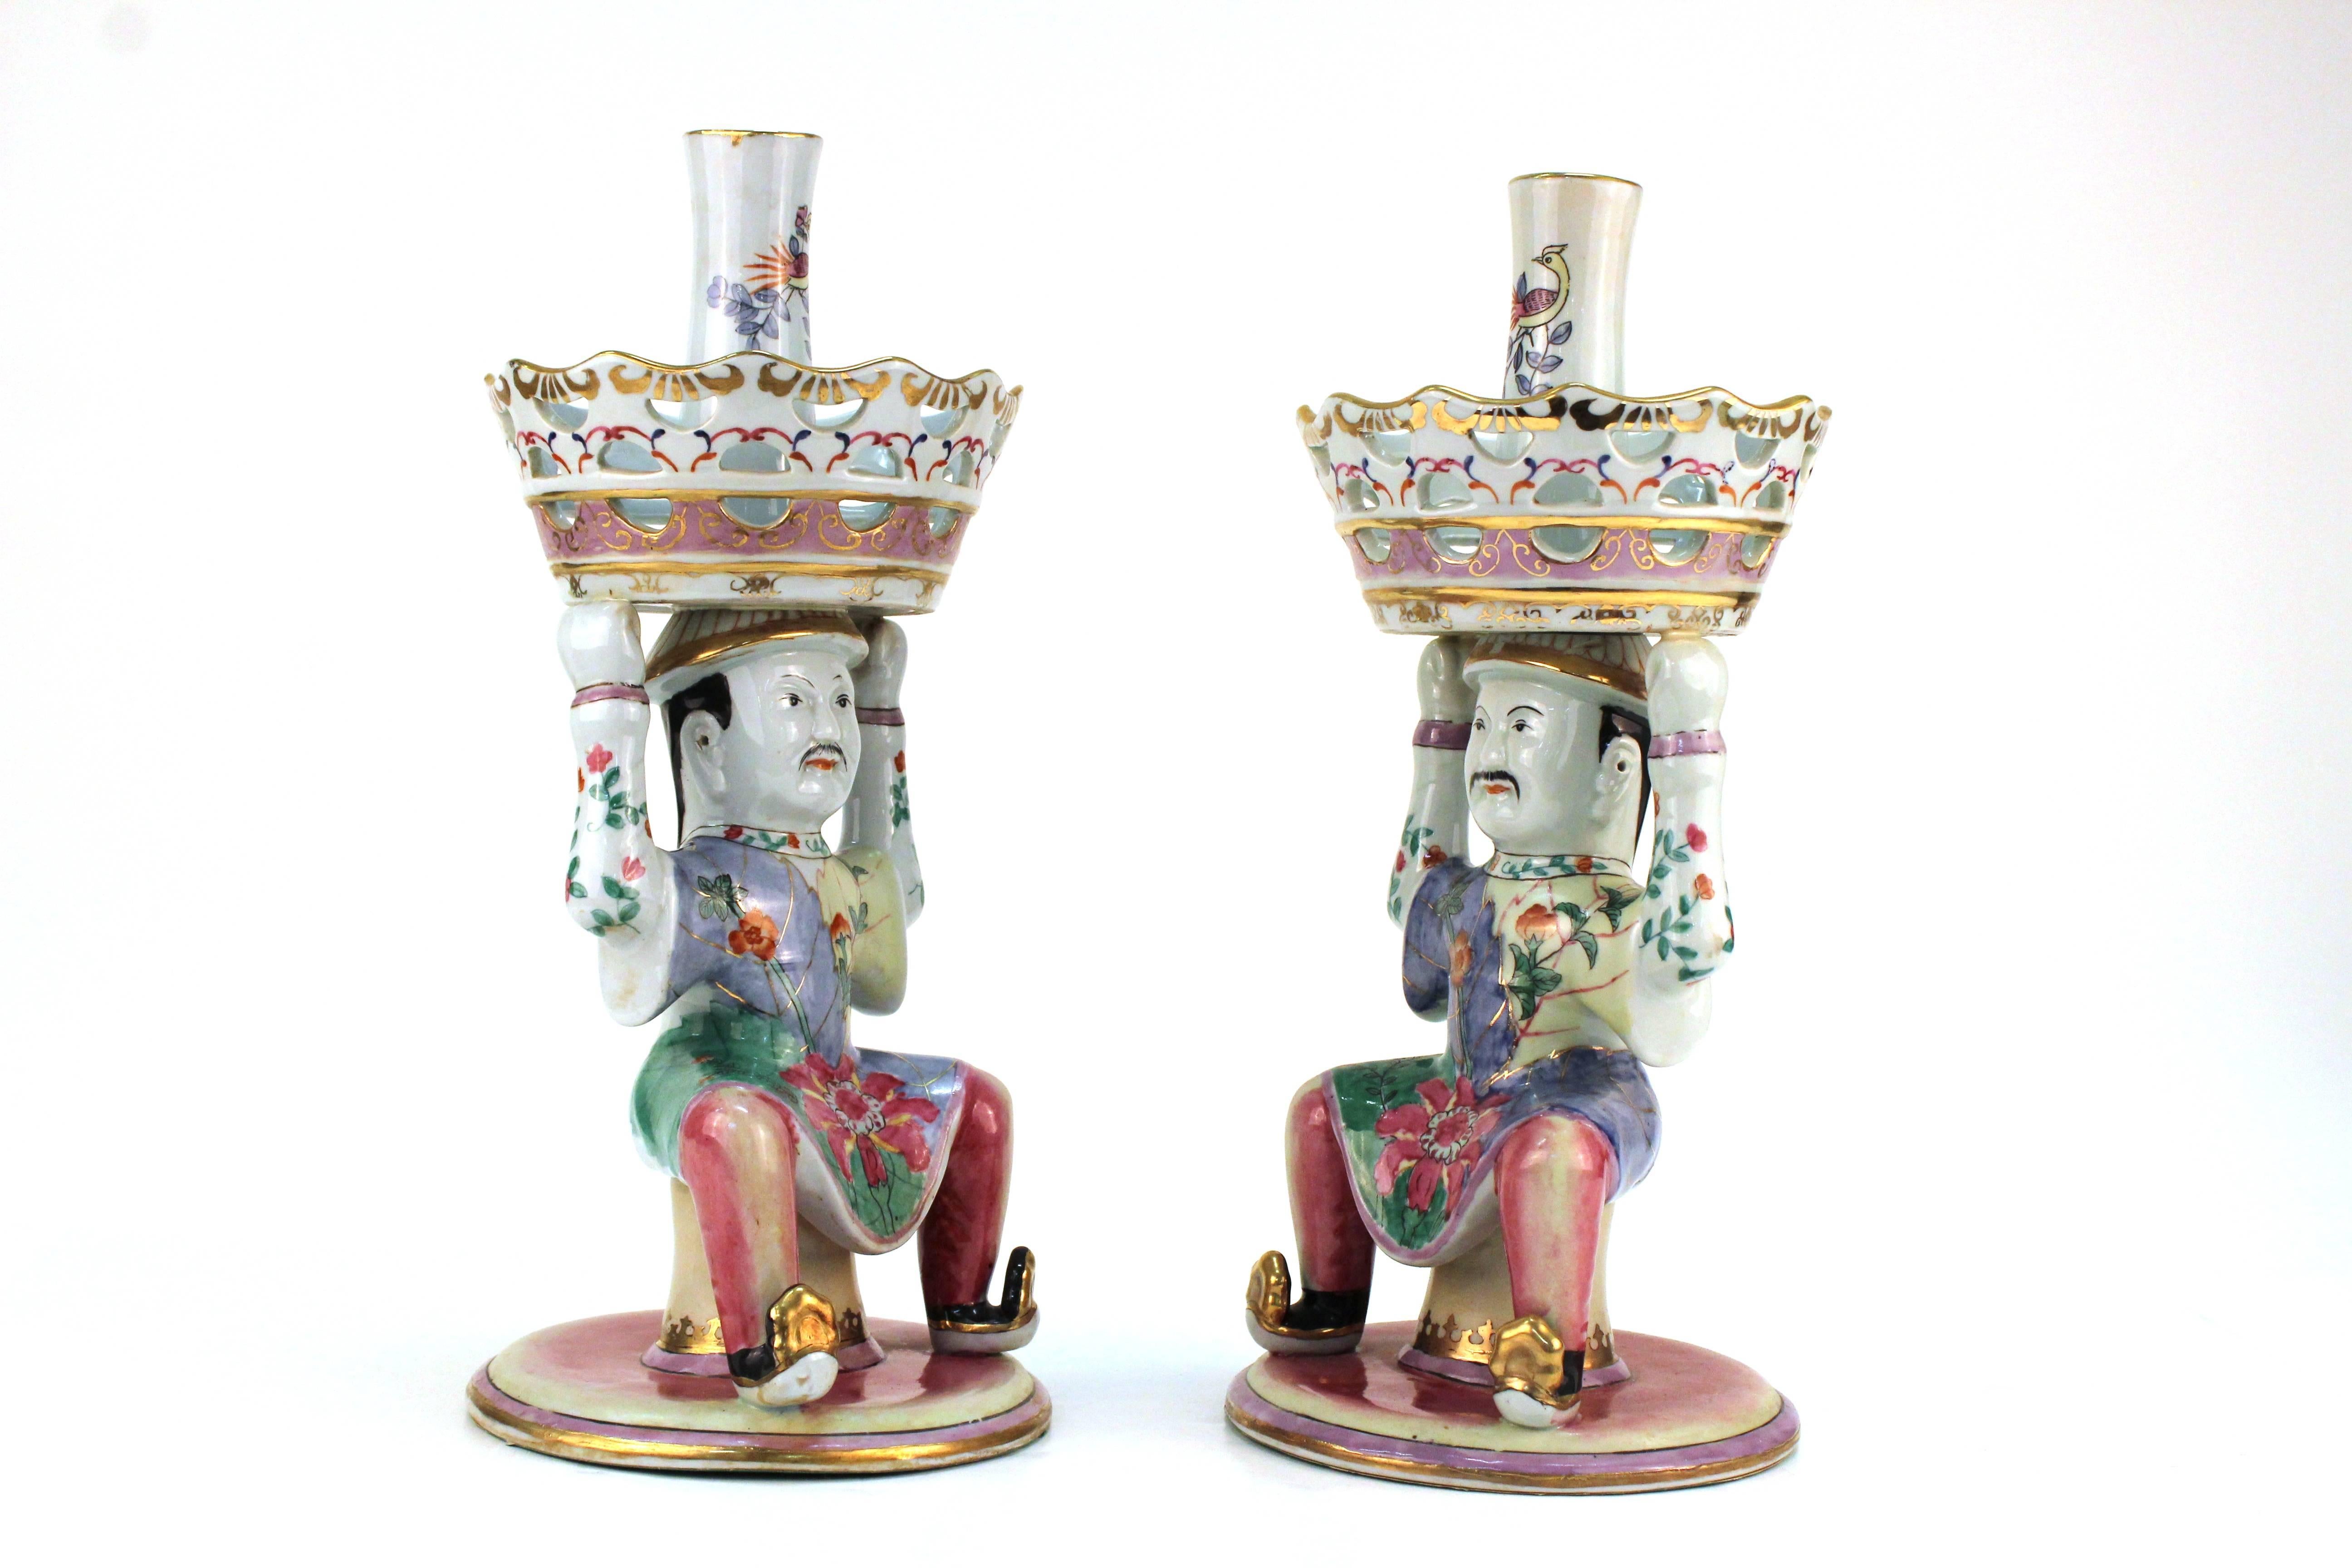 A pair of epergnes with baskets held by Chinese men in brightly colored tobacco leaf pattern robes. The tops include geometric cut-out and are painted with florals patterns with gold-tone accents. The bottom of both ceramic figures are covered in